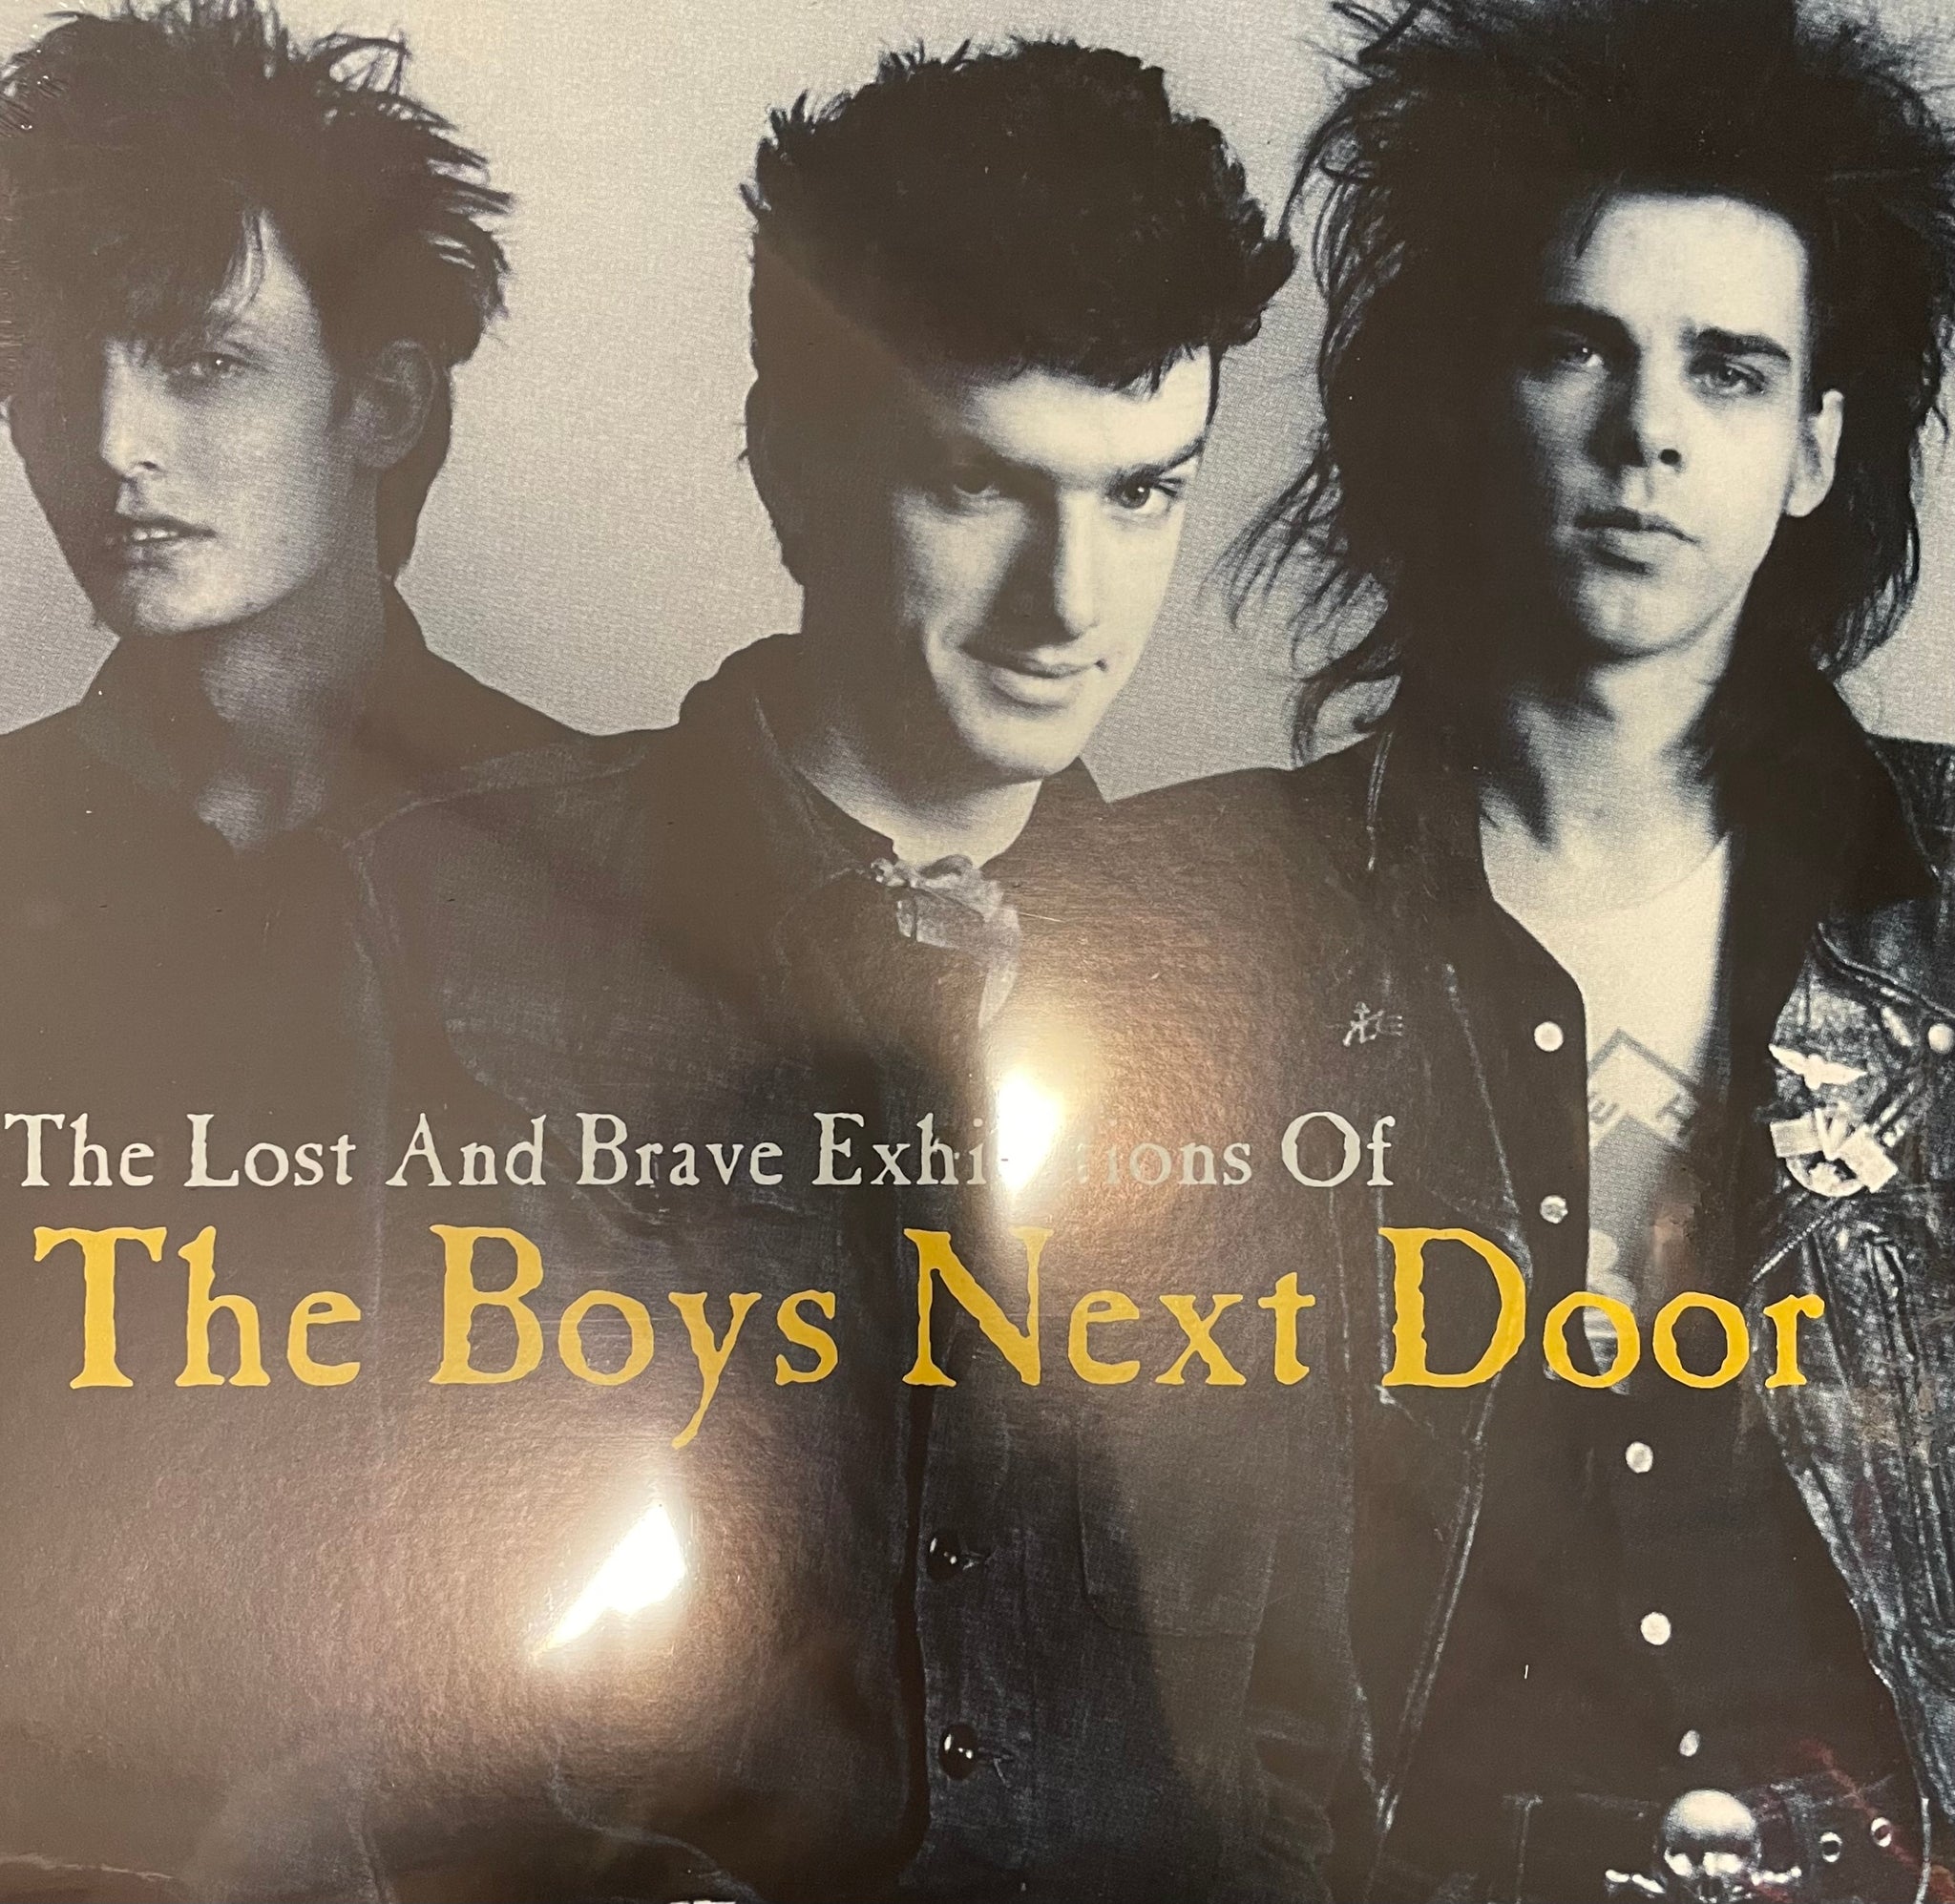 Boys Next Door "The Lost And Brave Exhibitions" LP